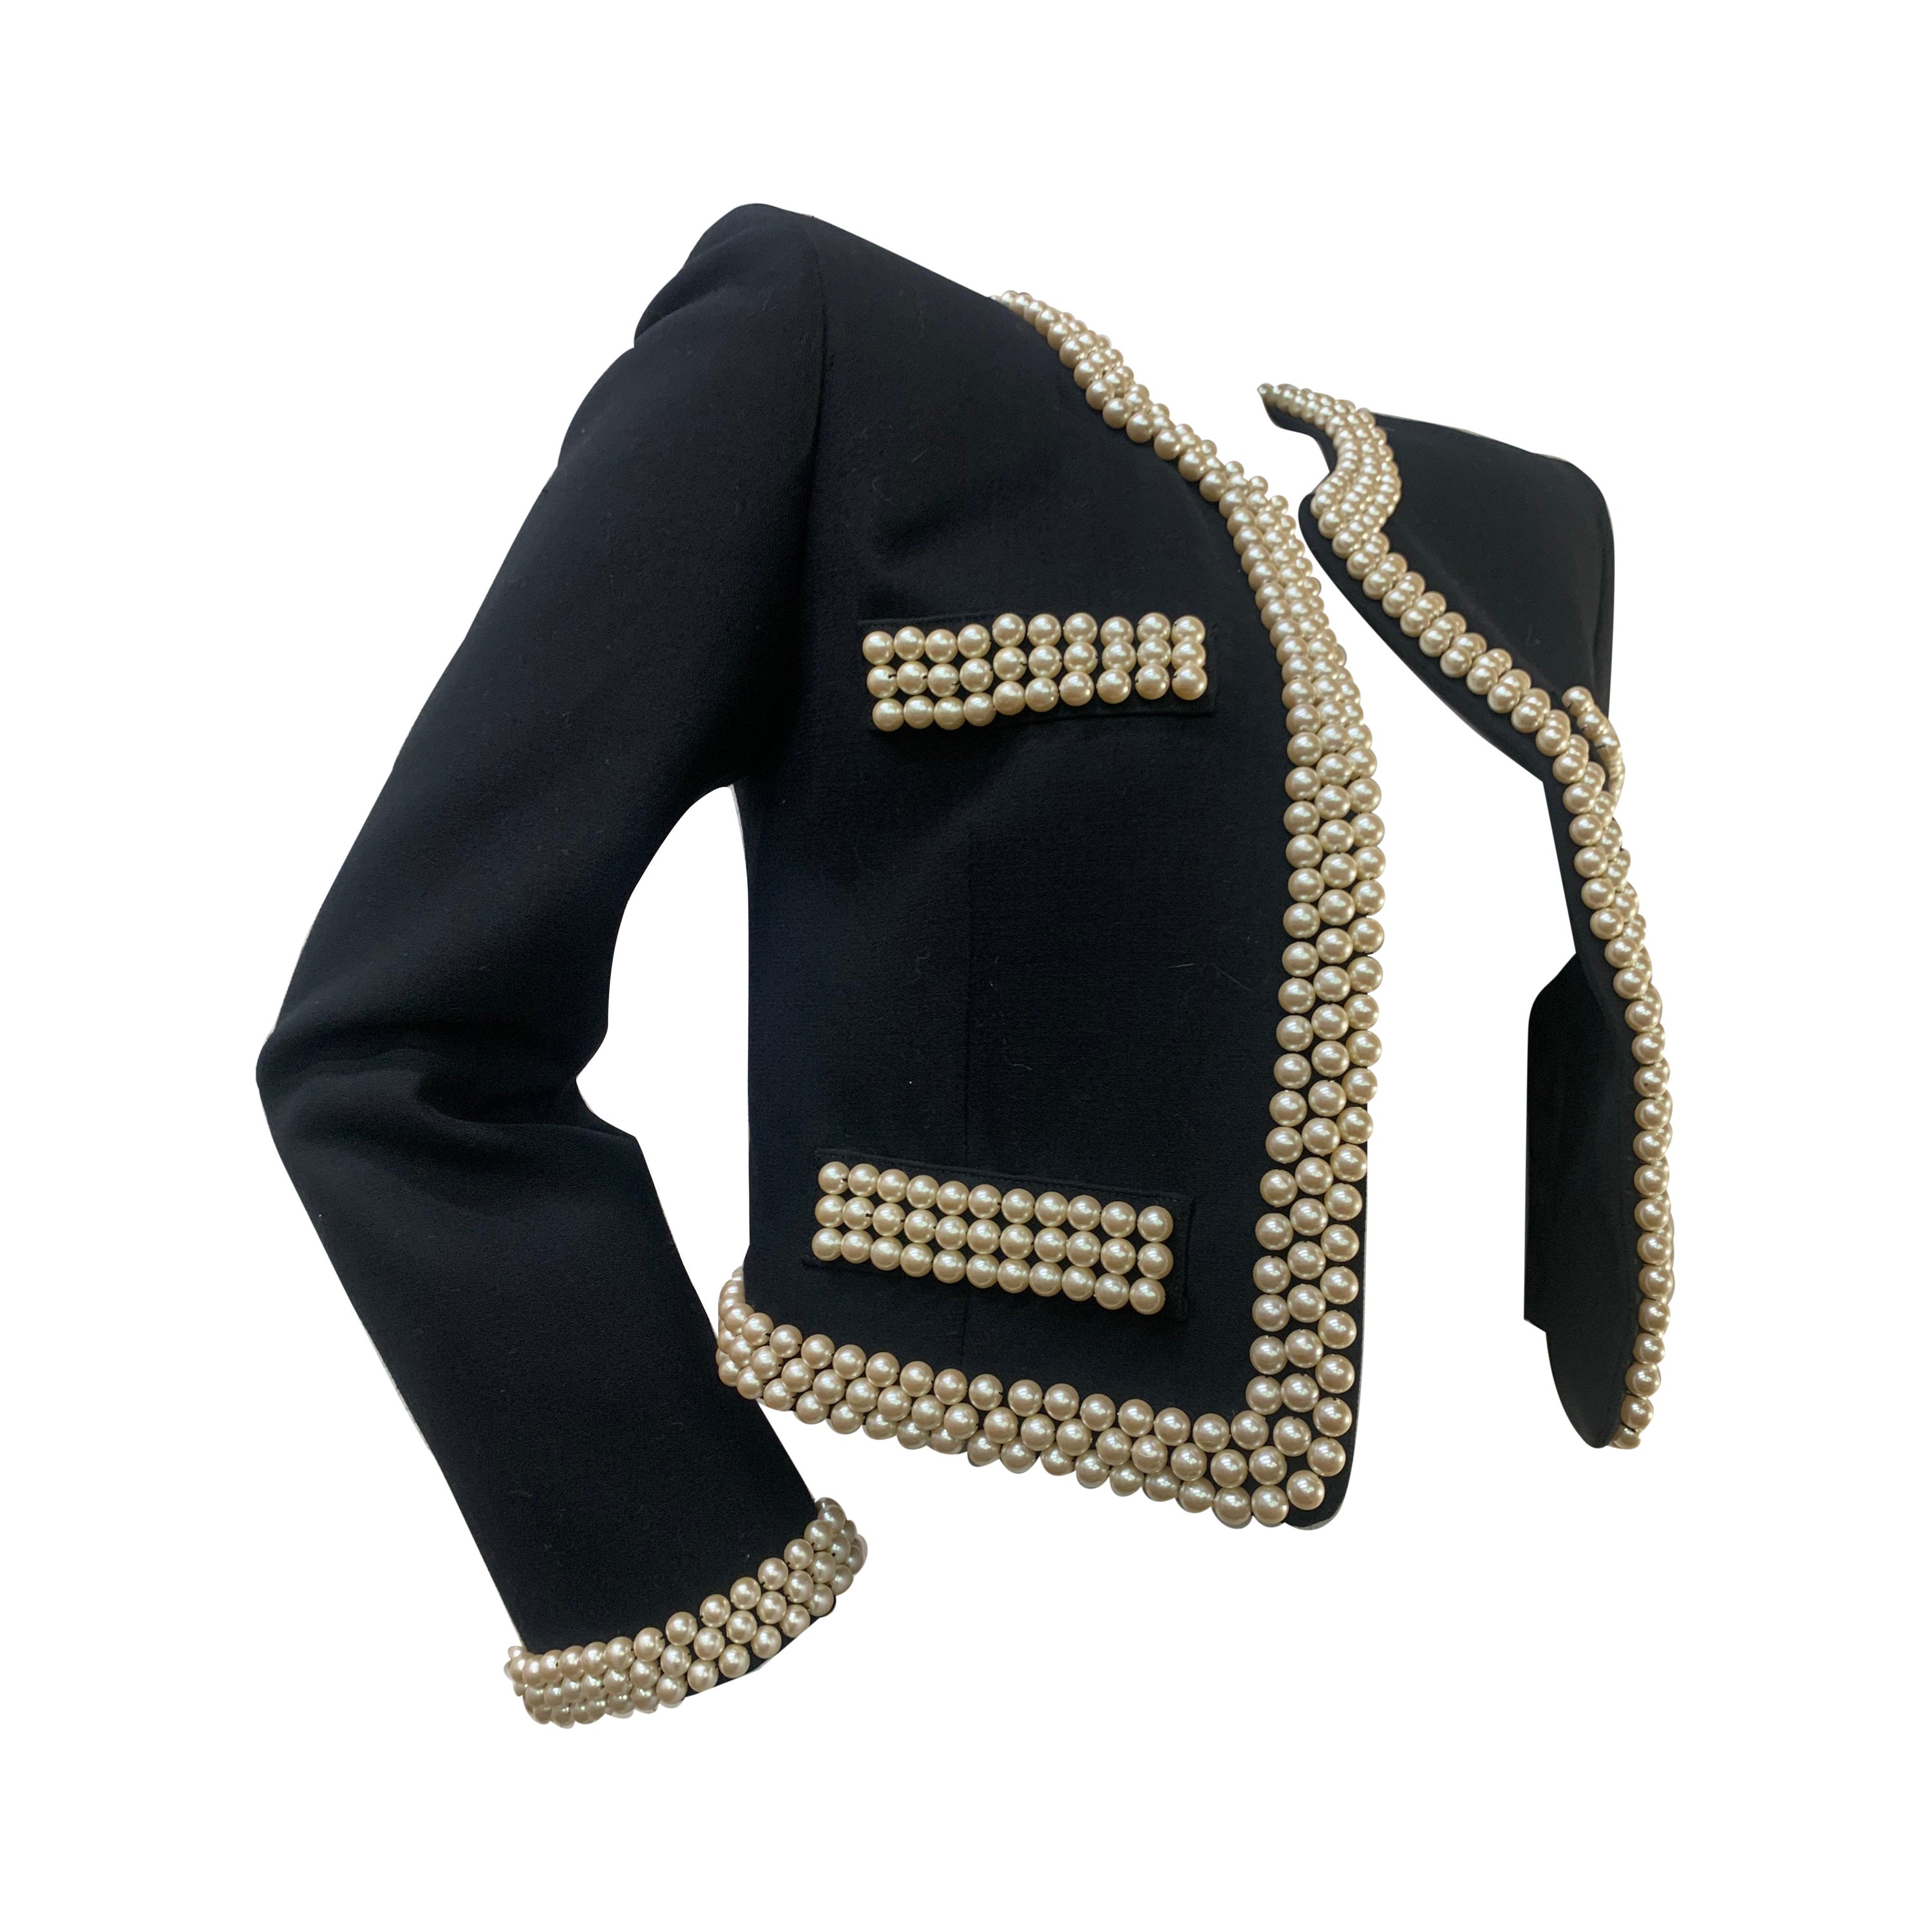 1980 Moschino Black Cropped Chanel-Styled Jacket w/ Pearl Studded Trim For Sale